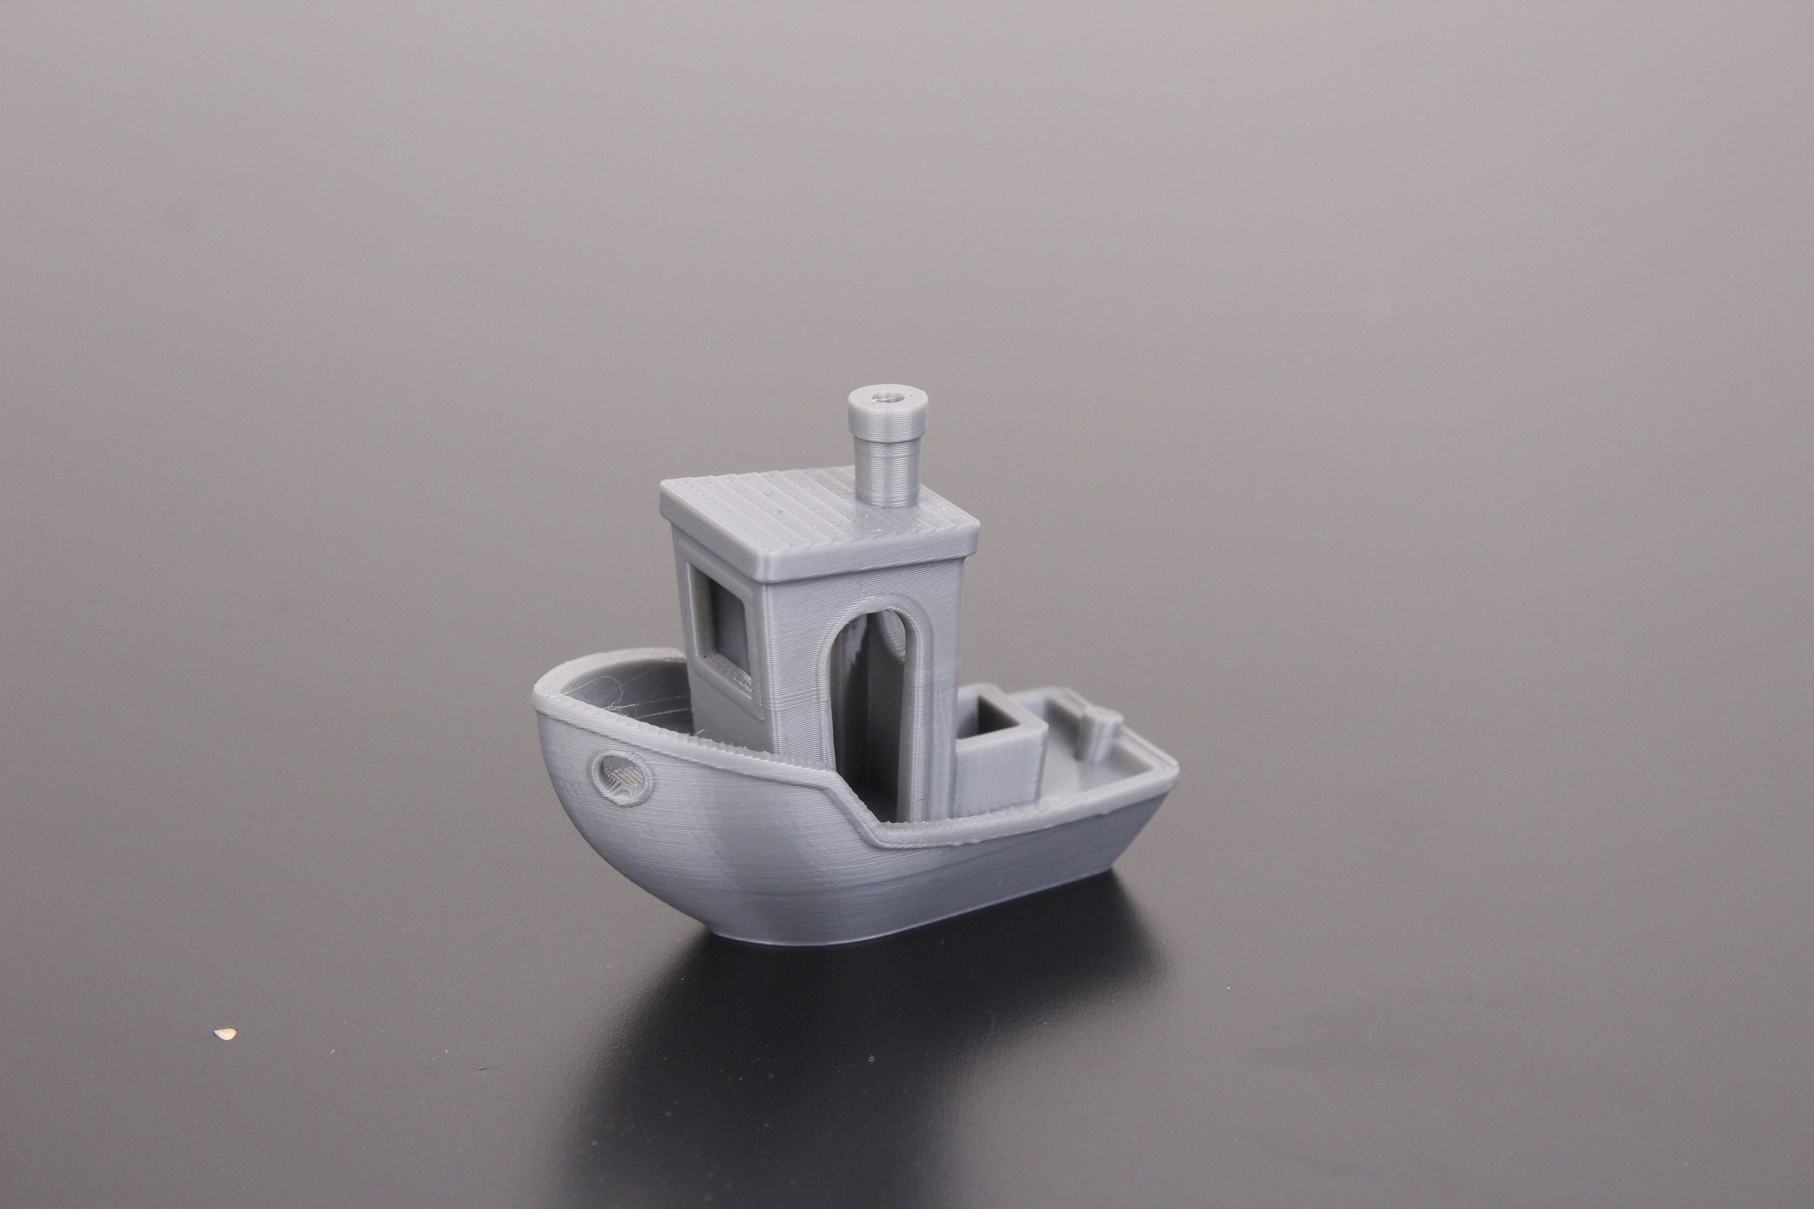 Voxelab Aries Review 3DBenchy pritned in PLA 3 | Voxelab Aries Review: A Worthy Upgrade for the Aquila?